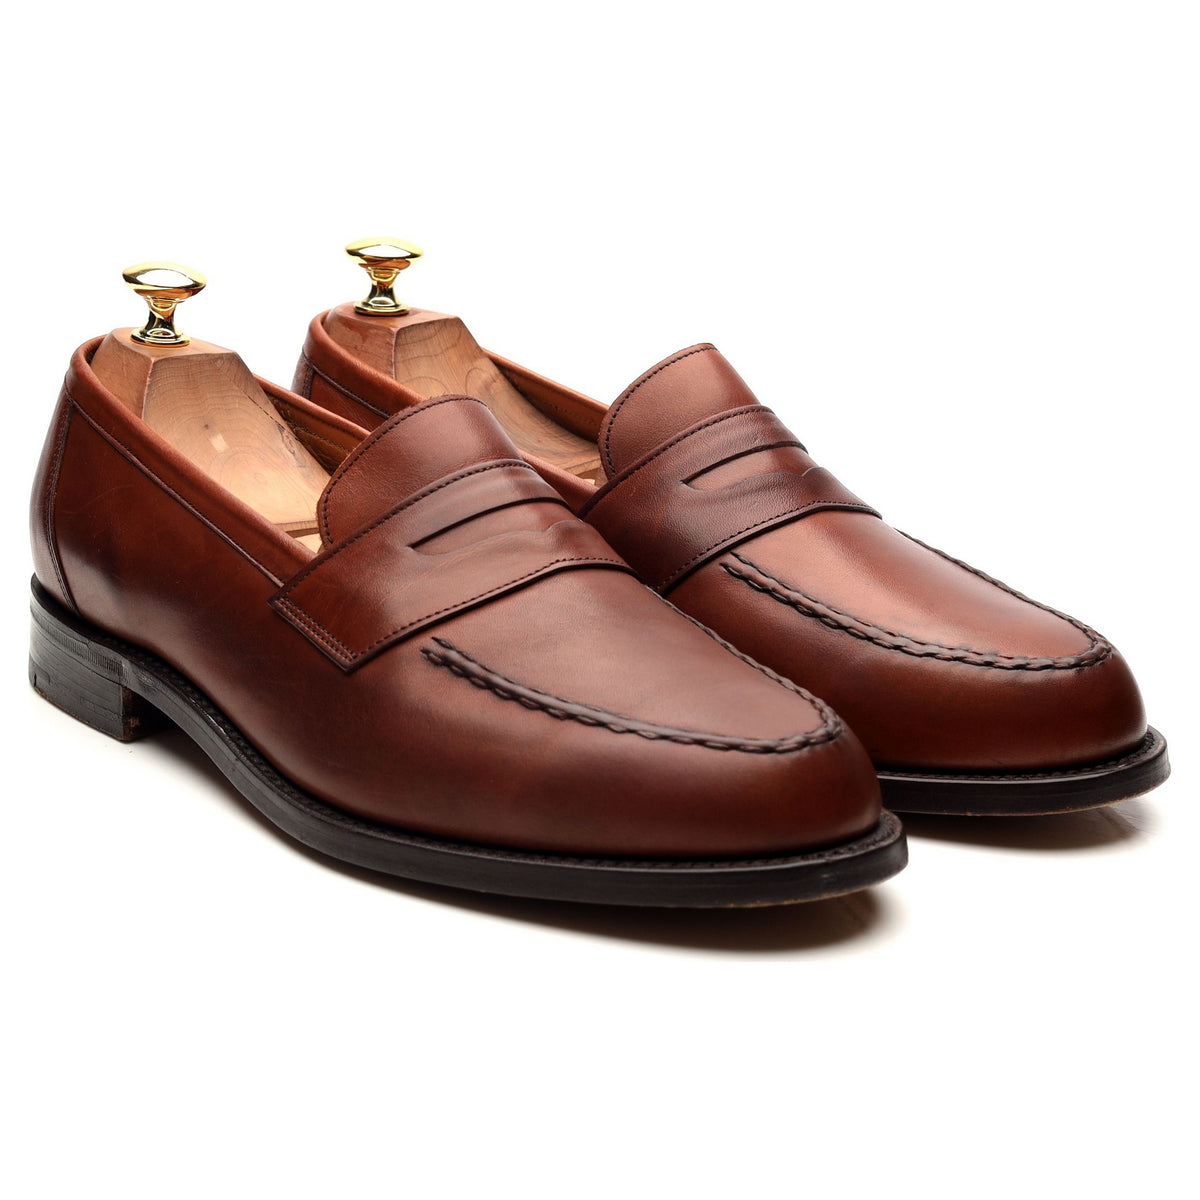 Tan Brown Leather Loafers UK 9 F